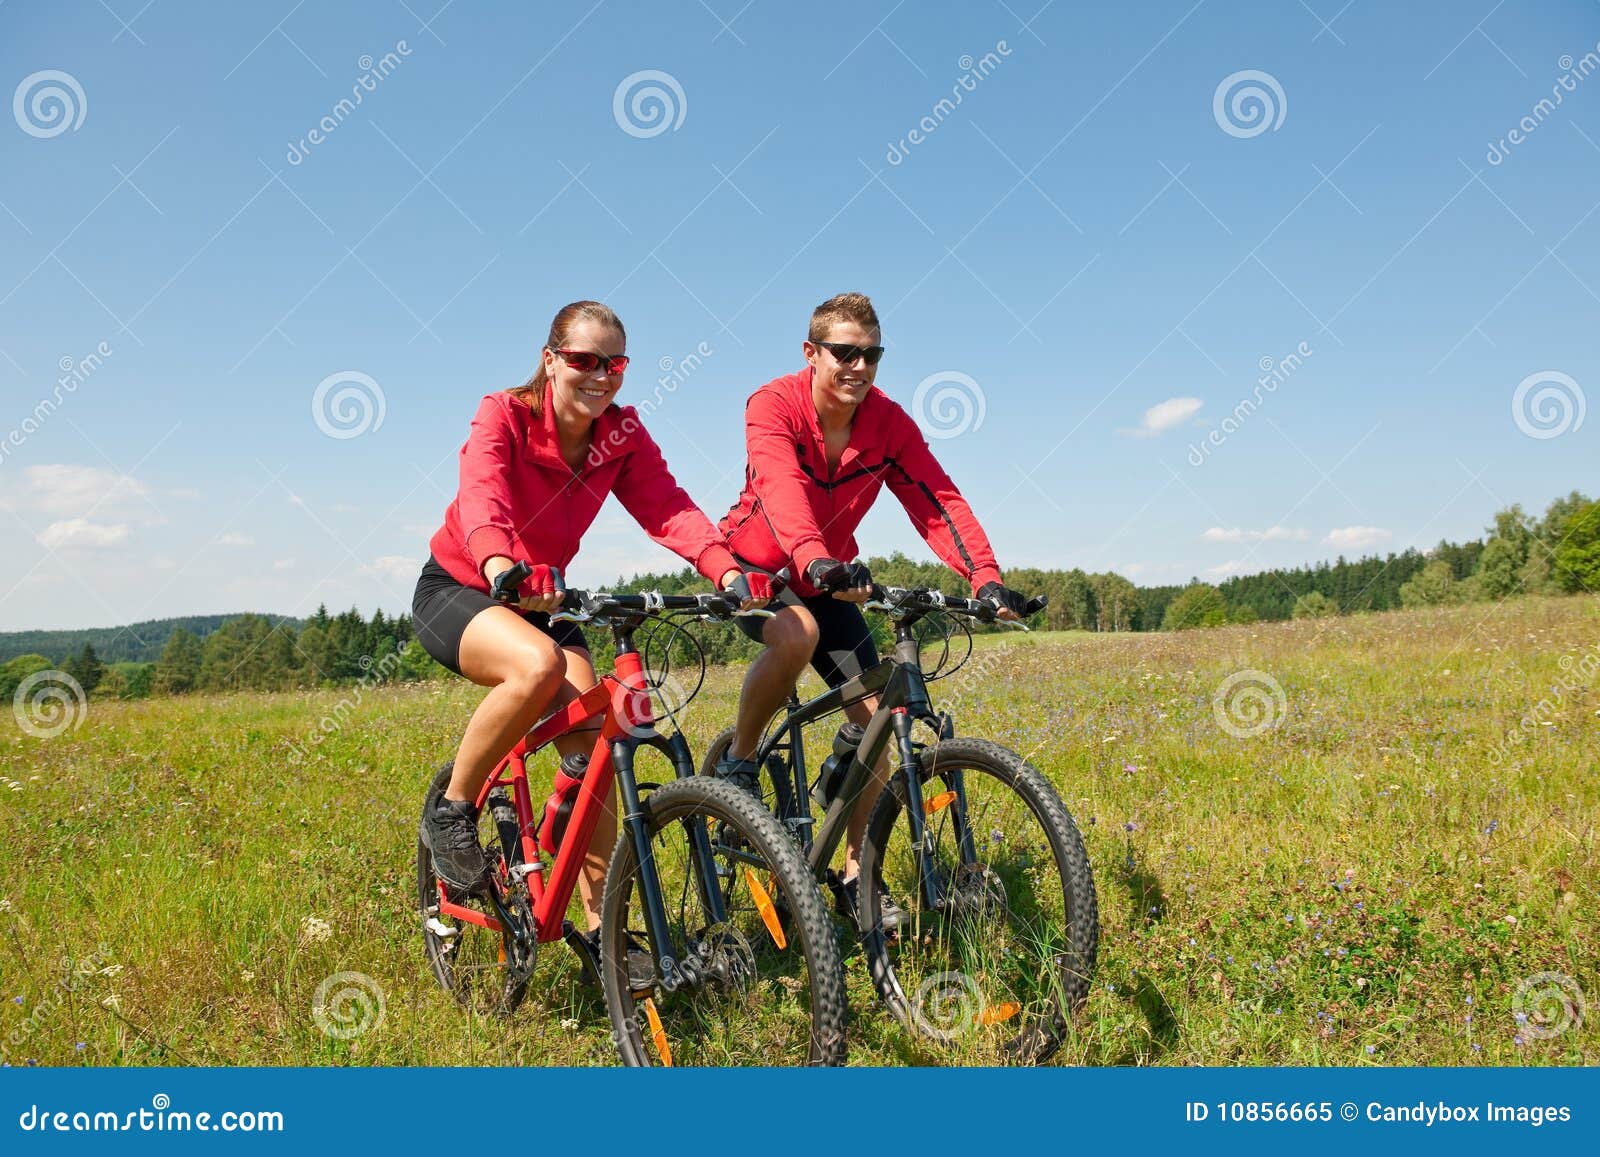 summer bike - young sportive couple in meadow